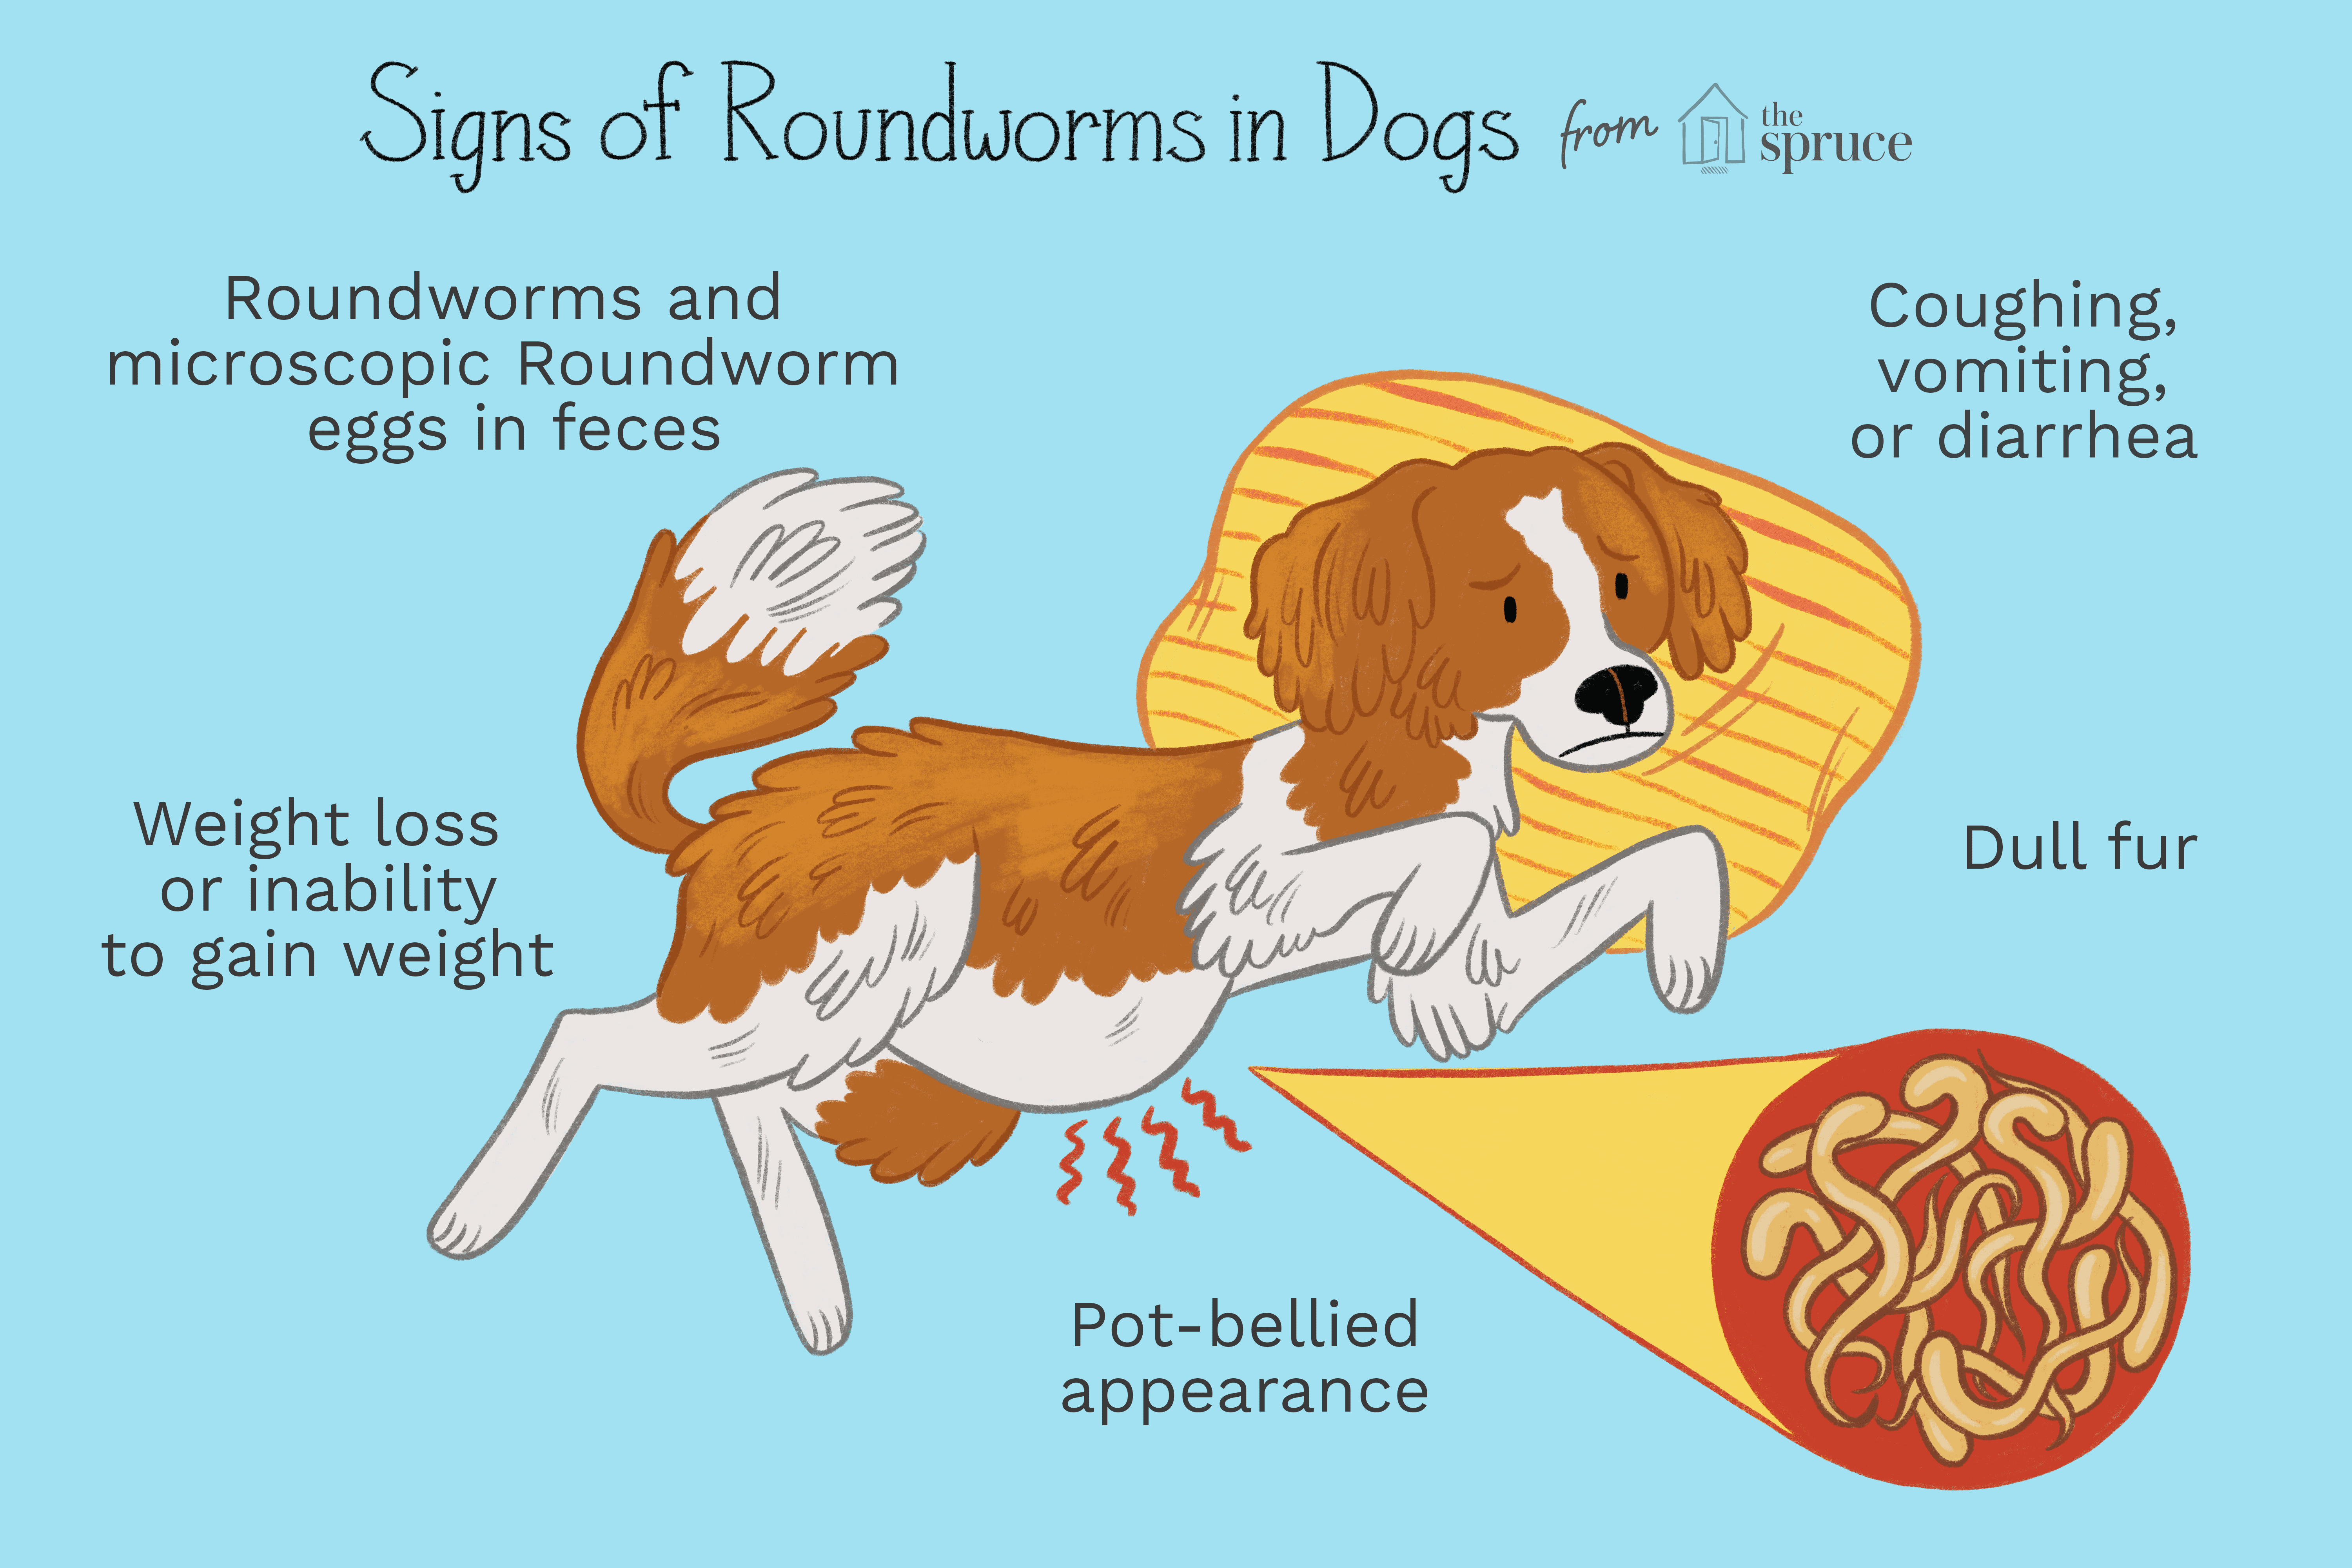 signs of roundworms in dogs illustration